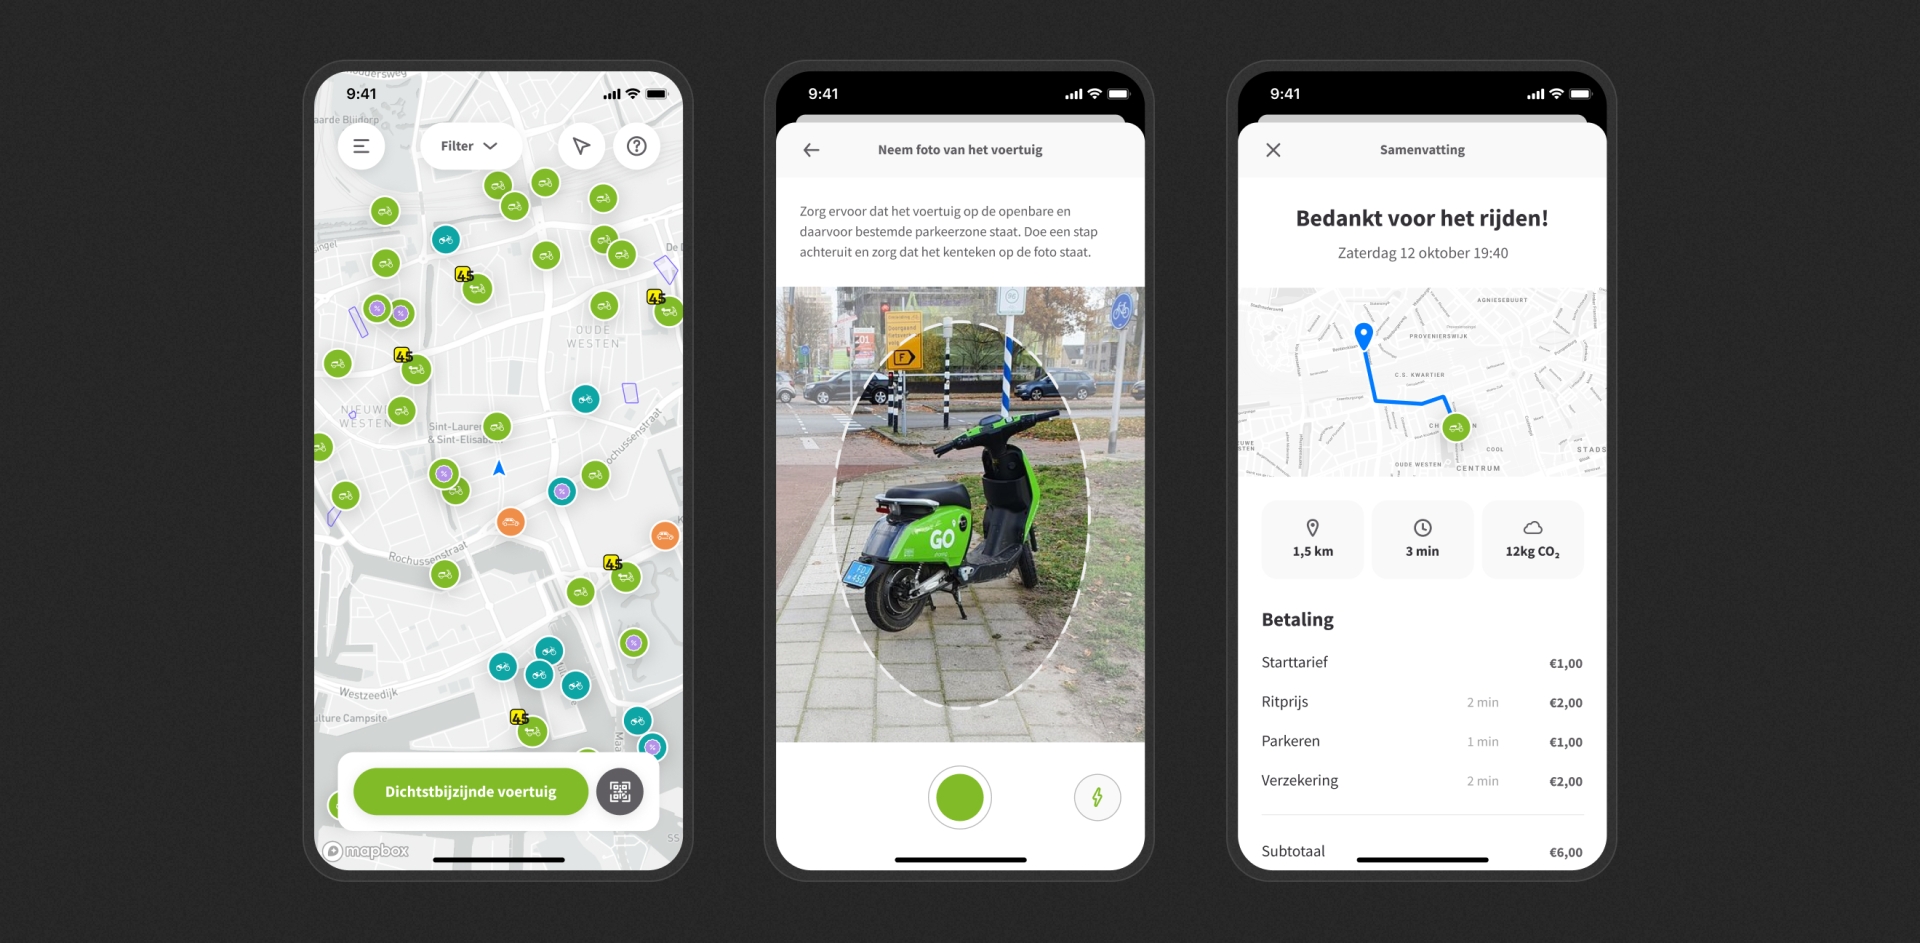 Three different screens of the GO Sharing app. The first one shows a map with the locations of all nearby vehicles. The second one shows the camera screen where you can take a picture of the vehicle. The instructions say to park the vehicle on the public road at the designated parking area and to have the licence plate in view. The third screen shows the screen after the ride is finished. It shows the route you have taken, the distance, the cost, the CO2 emmissions and more details.